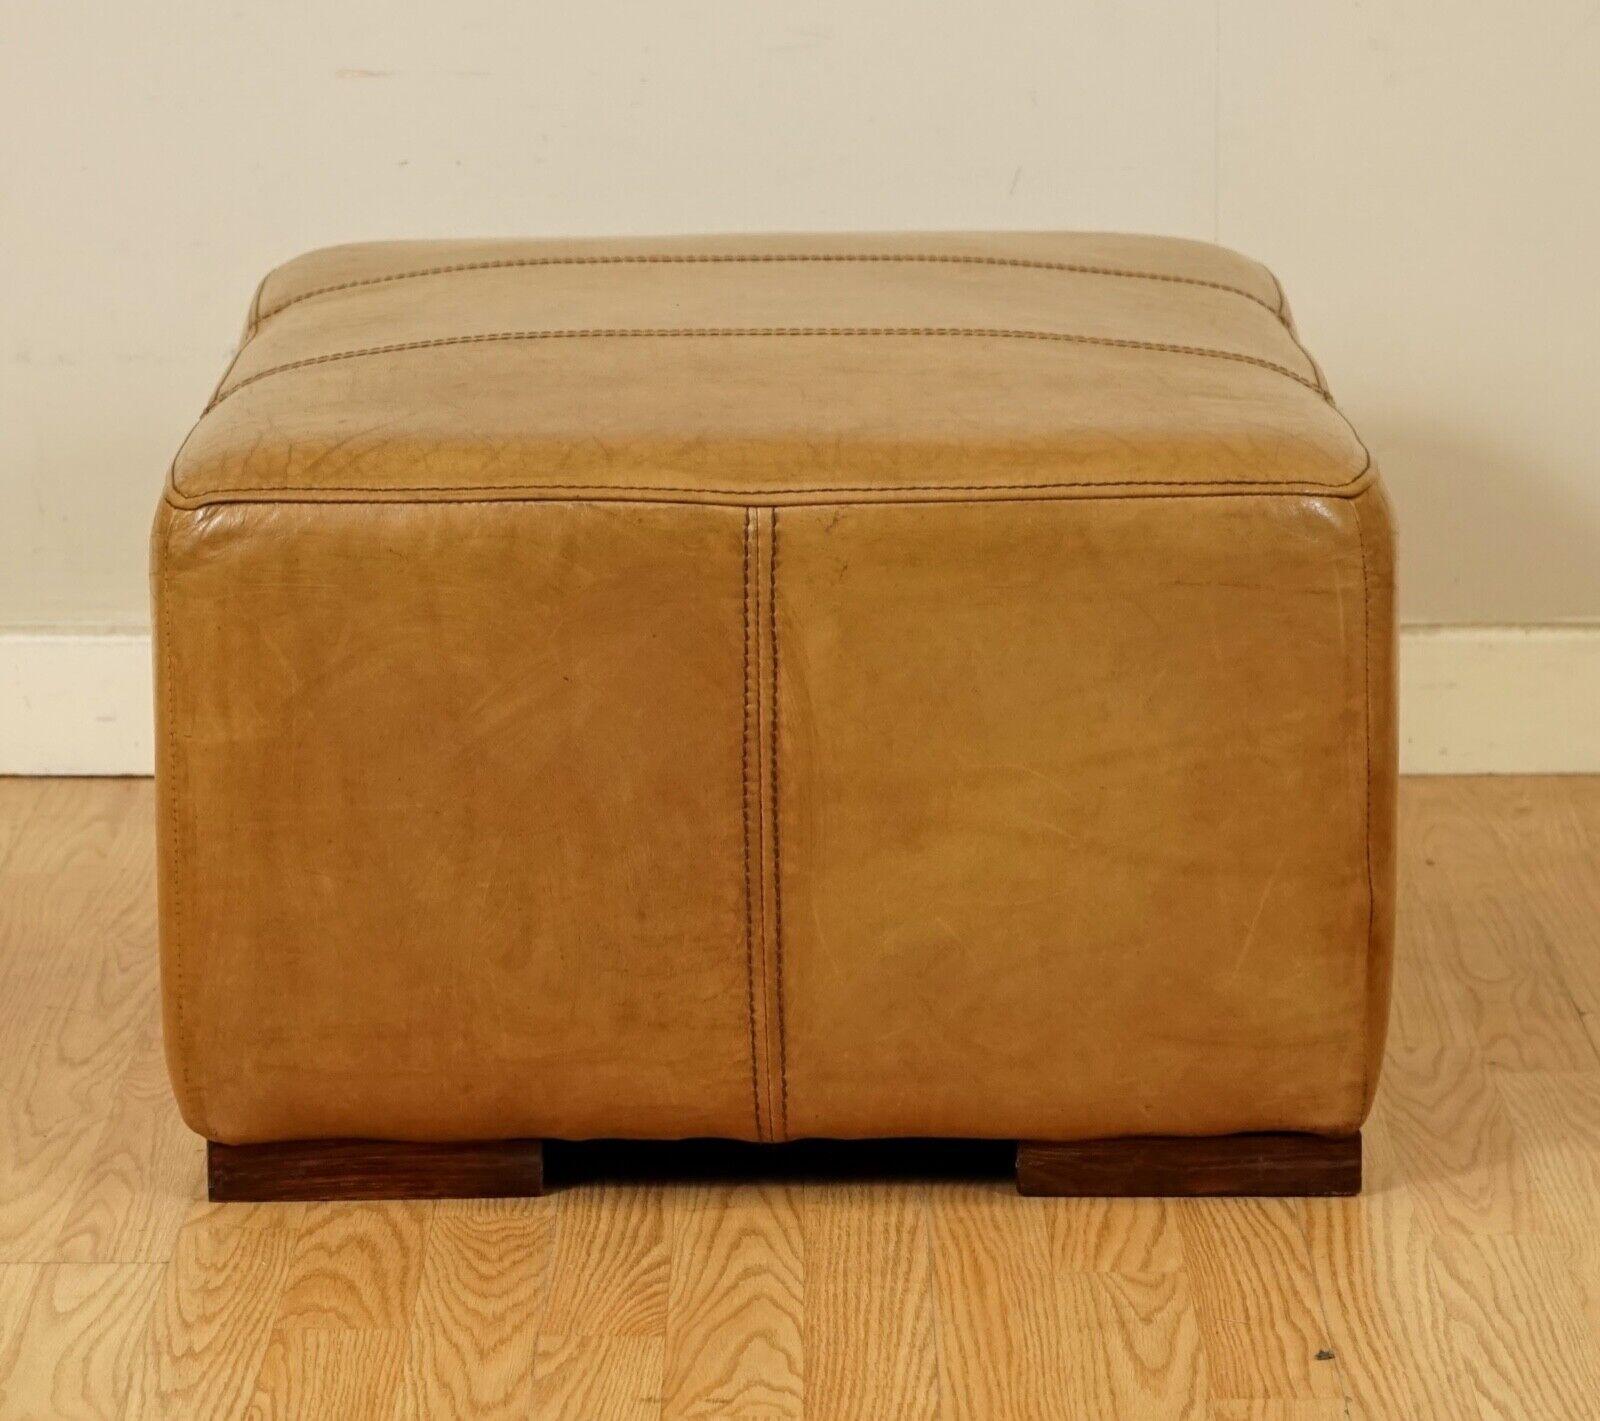 Hand-Crafted Large Vintage Tan Leather Footstool Ottoman by Halo